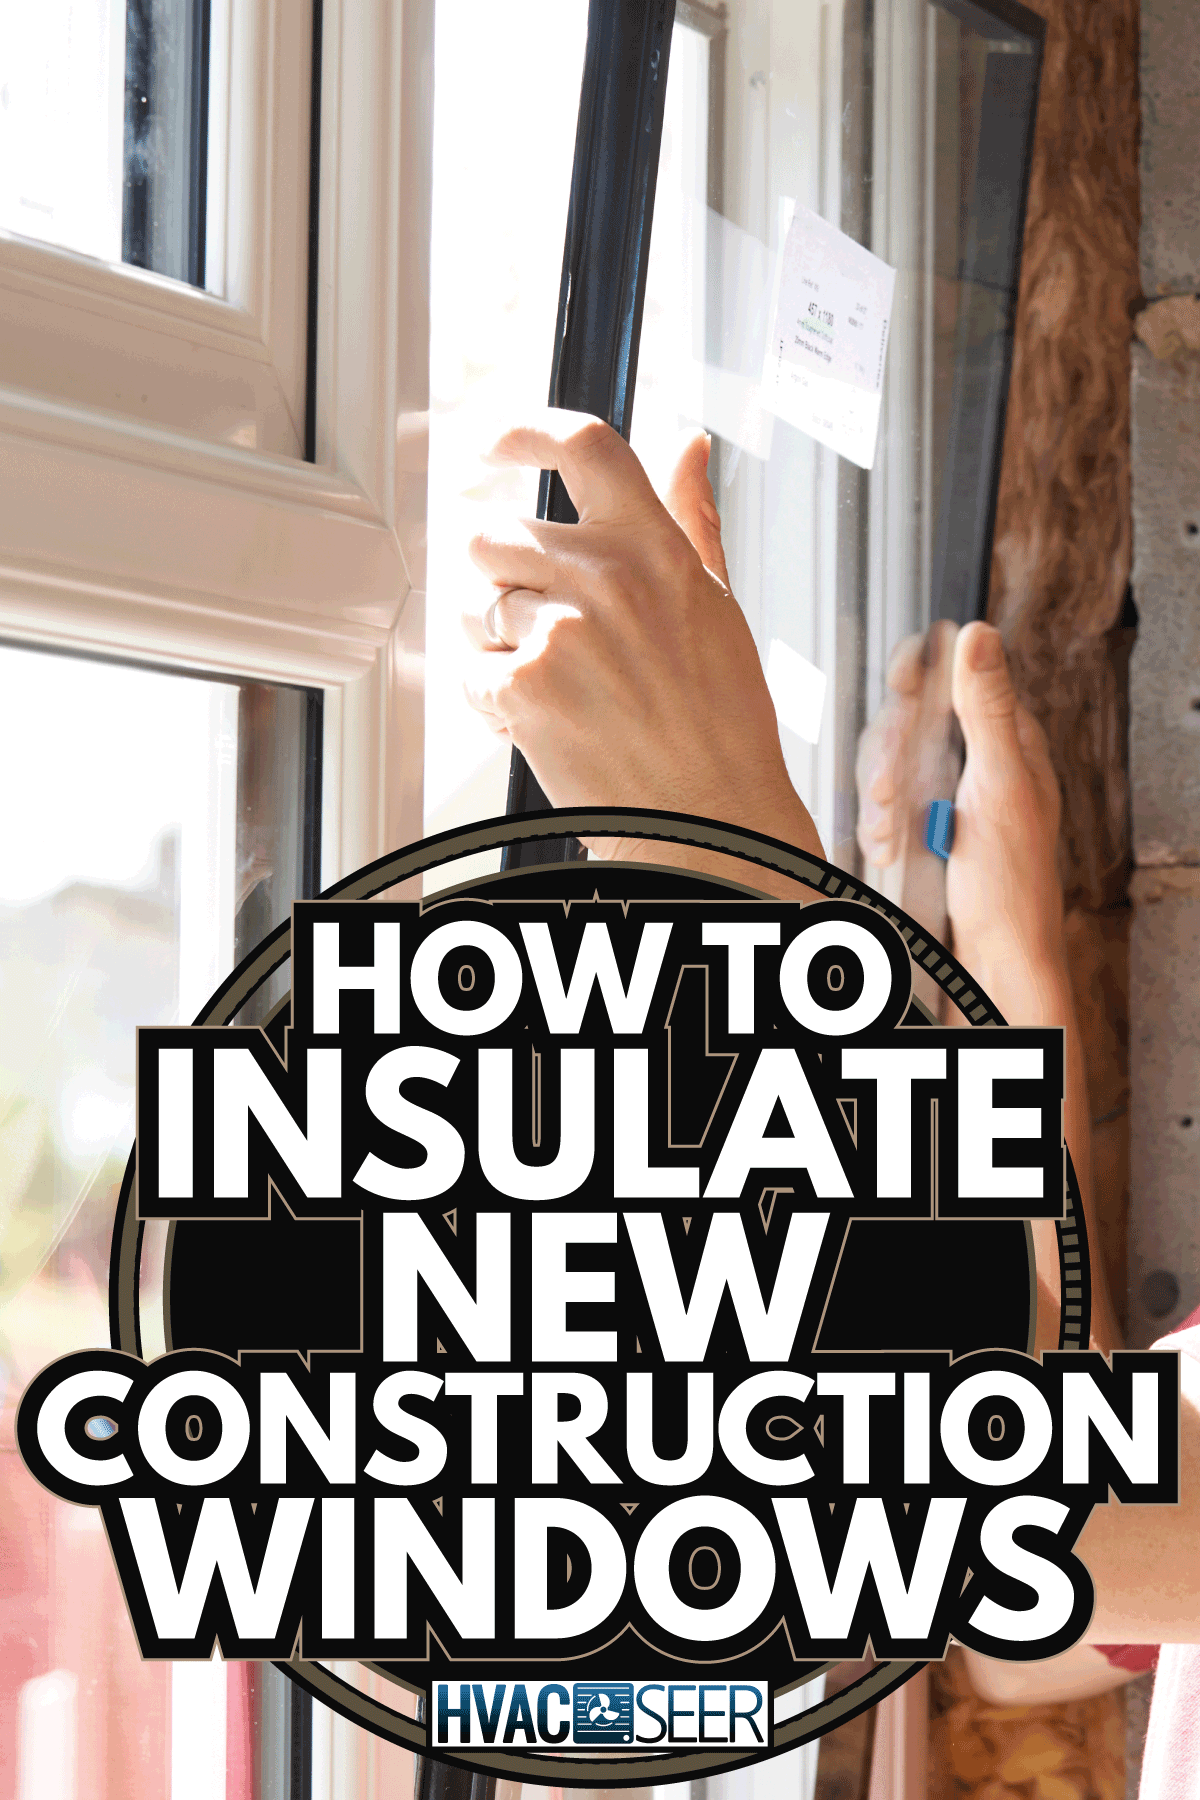 Construction Worker Installing New Windows In House. How To Insulate New Construction Windows